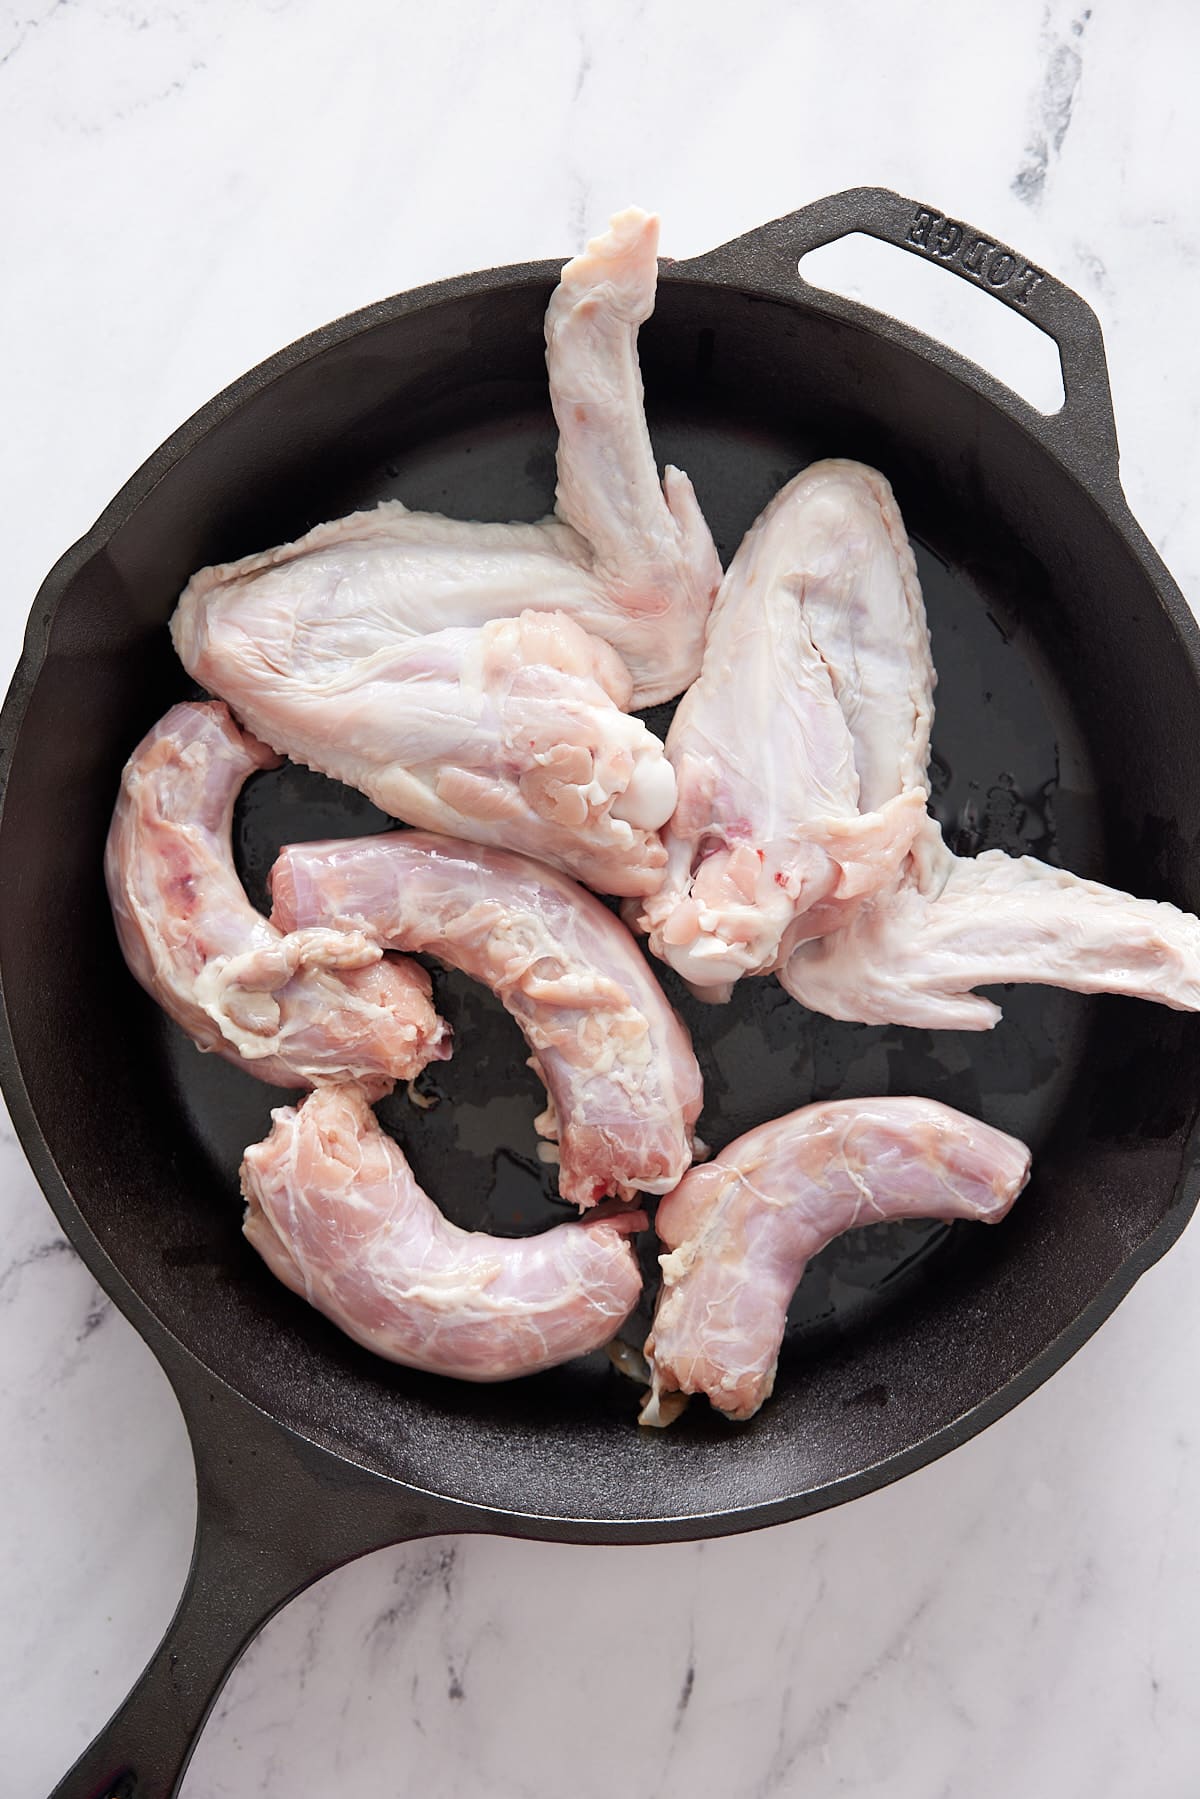 Cast iron skillet with raw turkey wings and neck